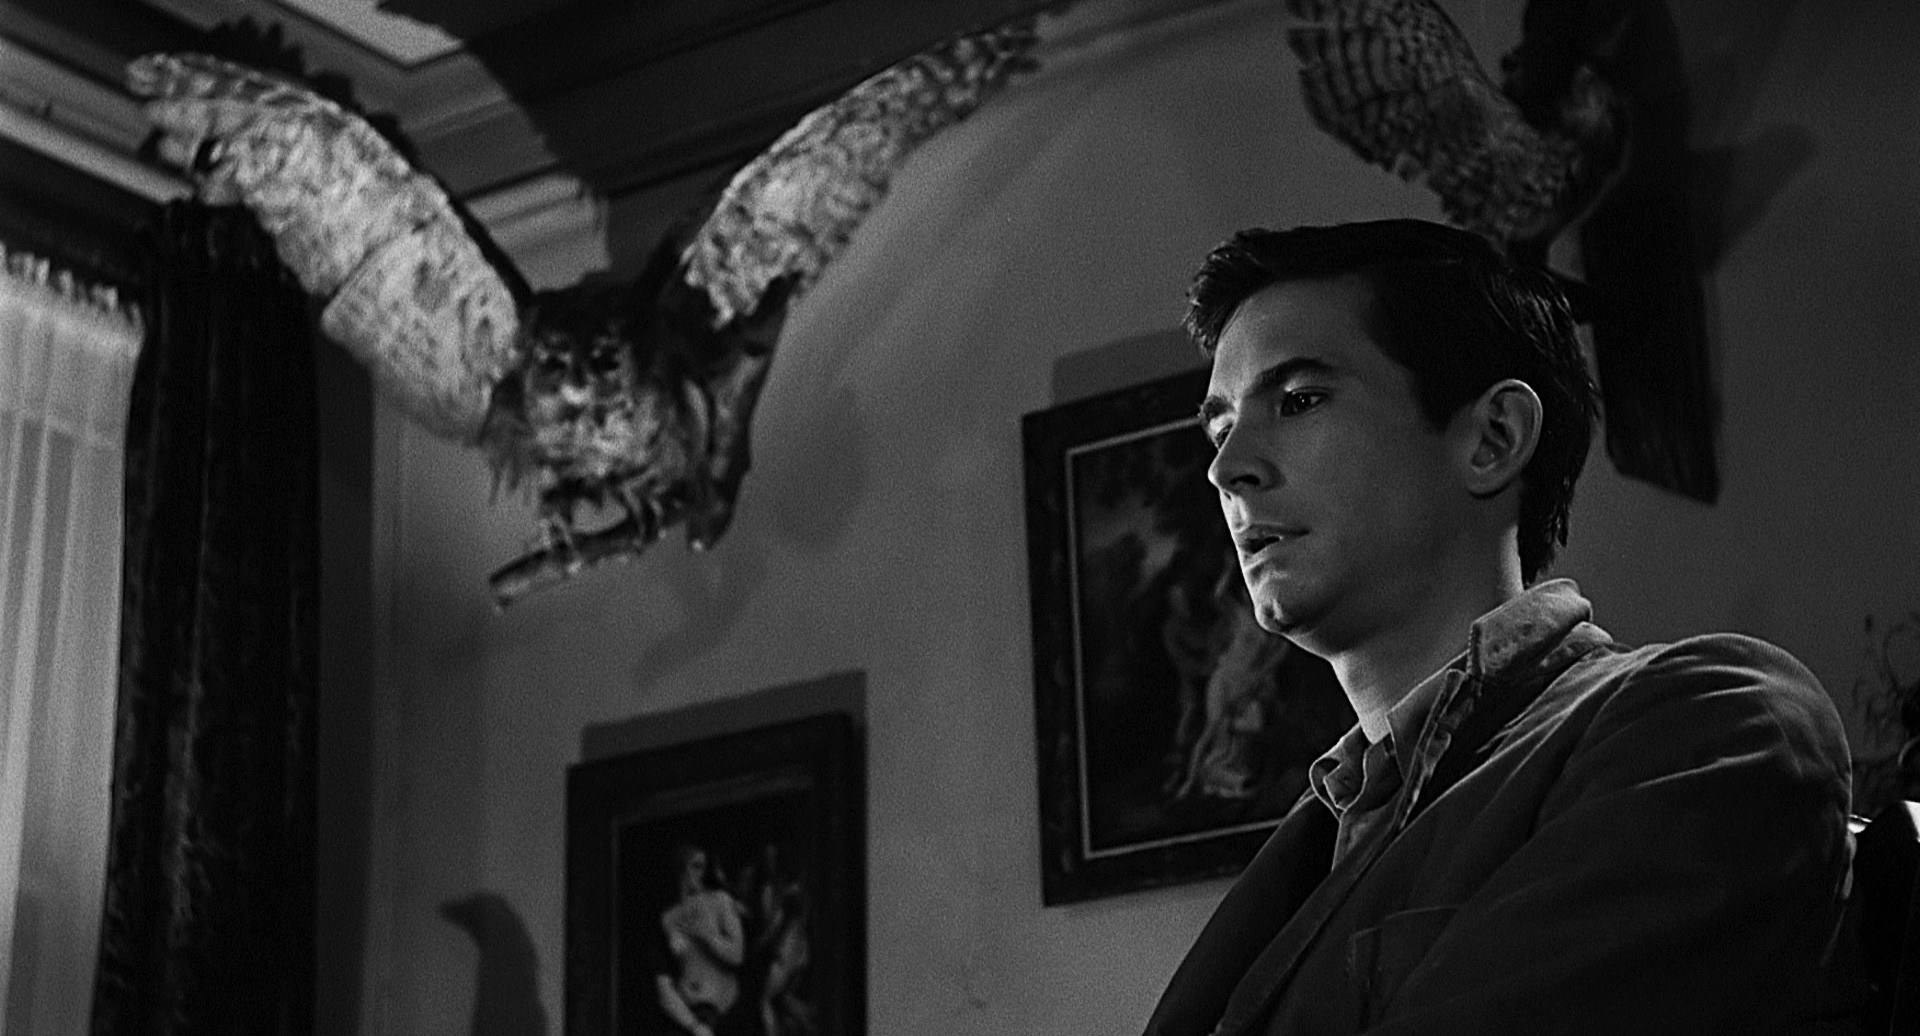 Anthony Perkins talking with a taxidermied owl in the background.